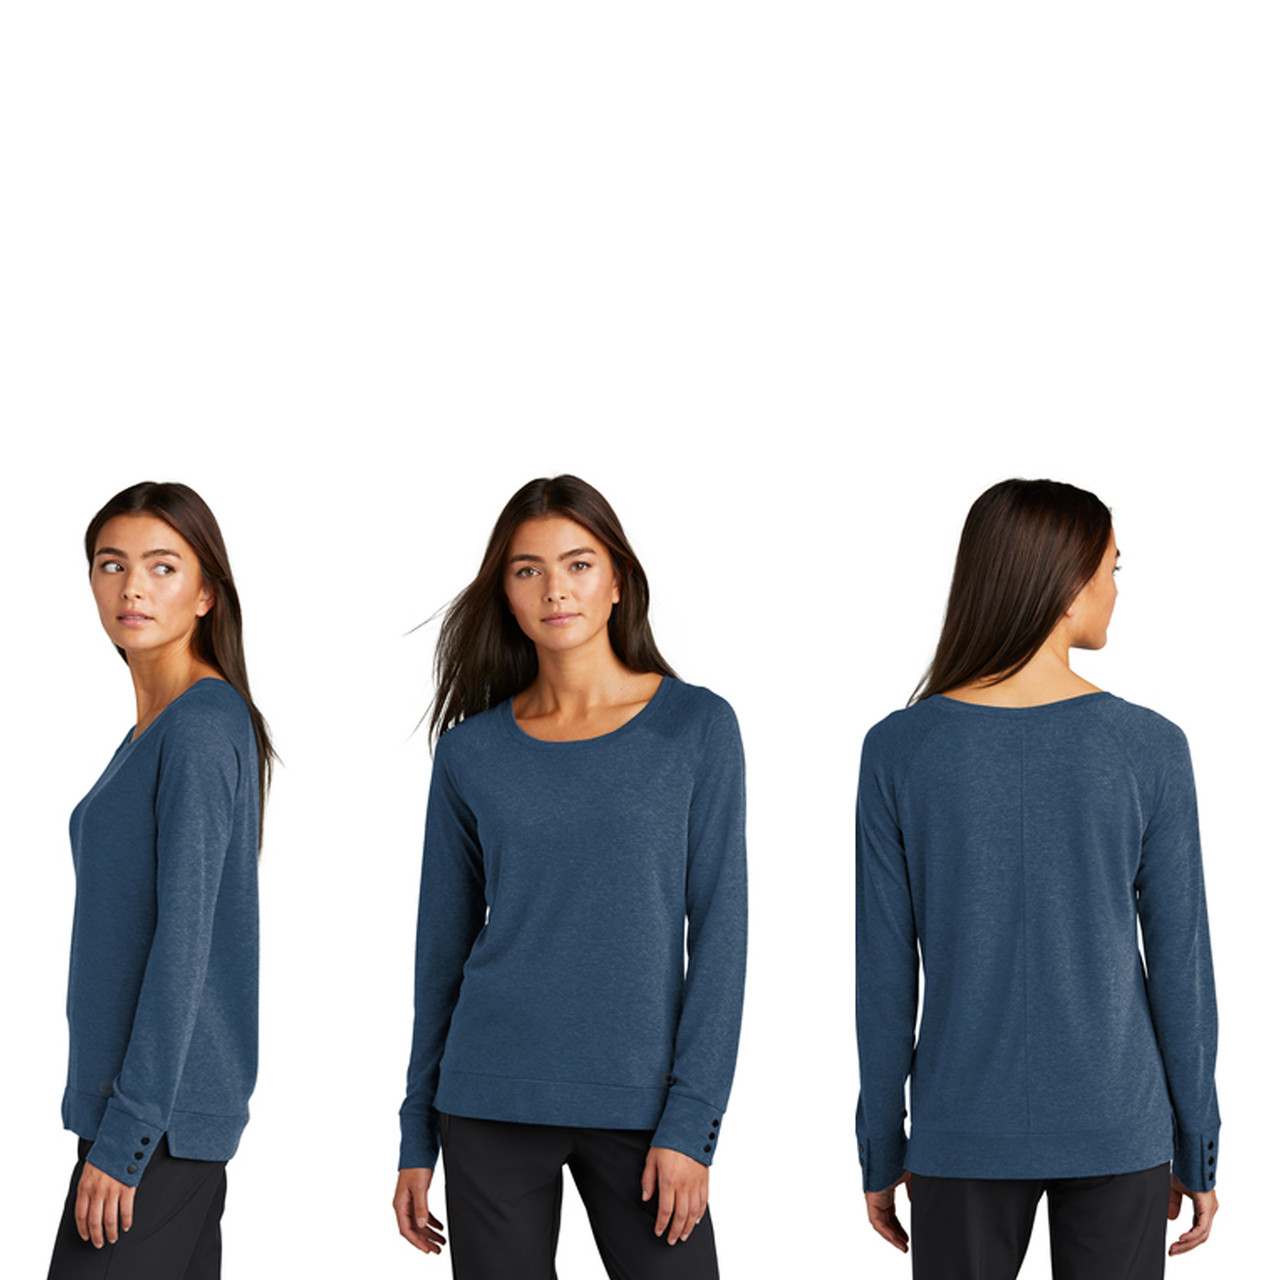 OGIO® Long Sleeve Scoop Neck Shirt  - Women's** (Restrictions Apply - see description)